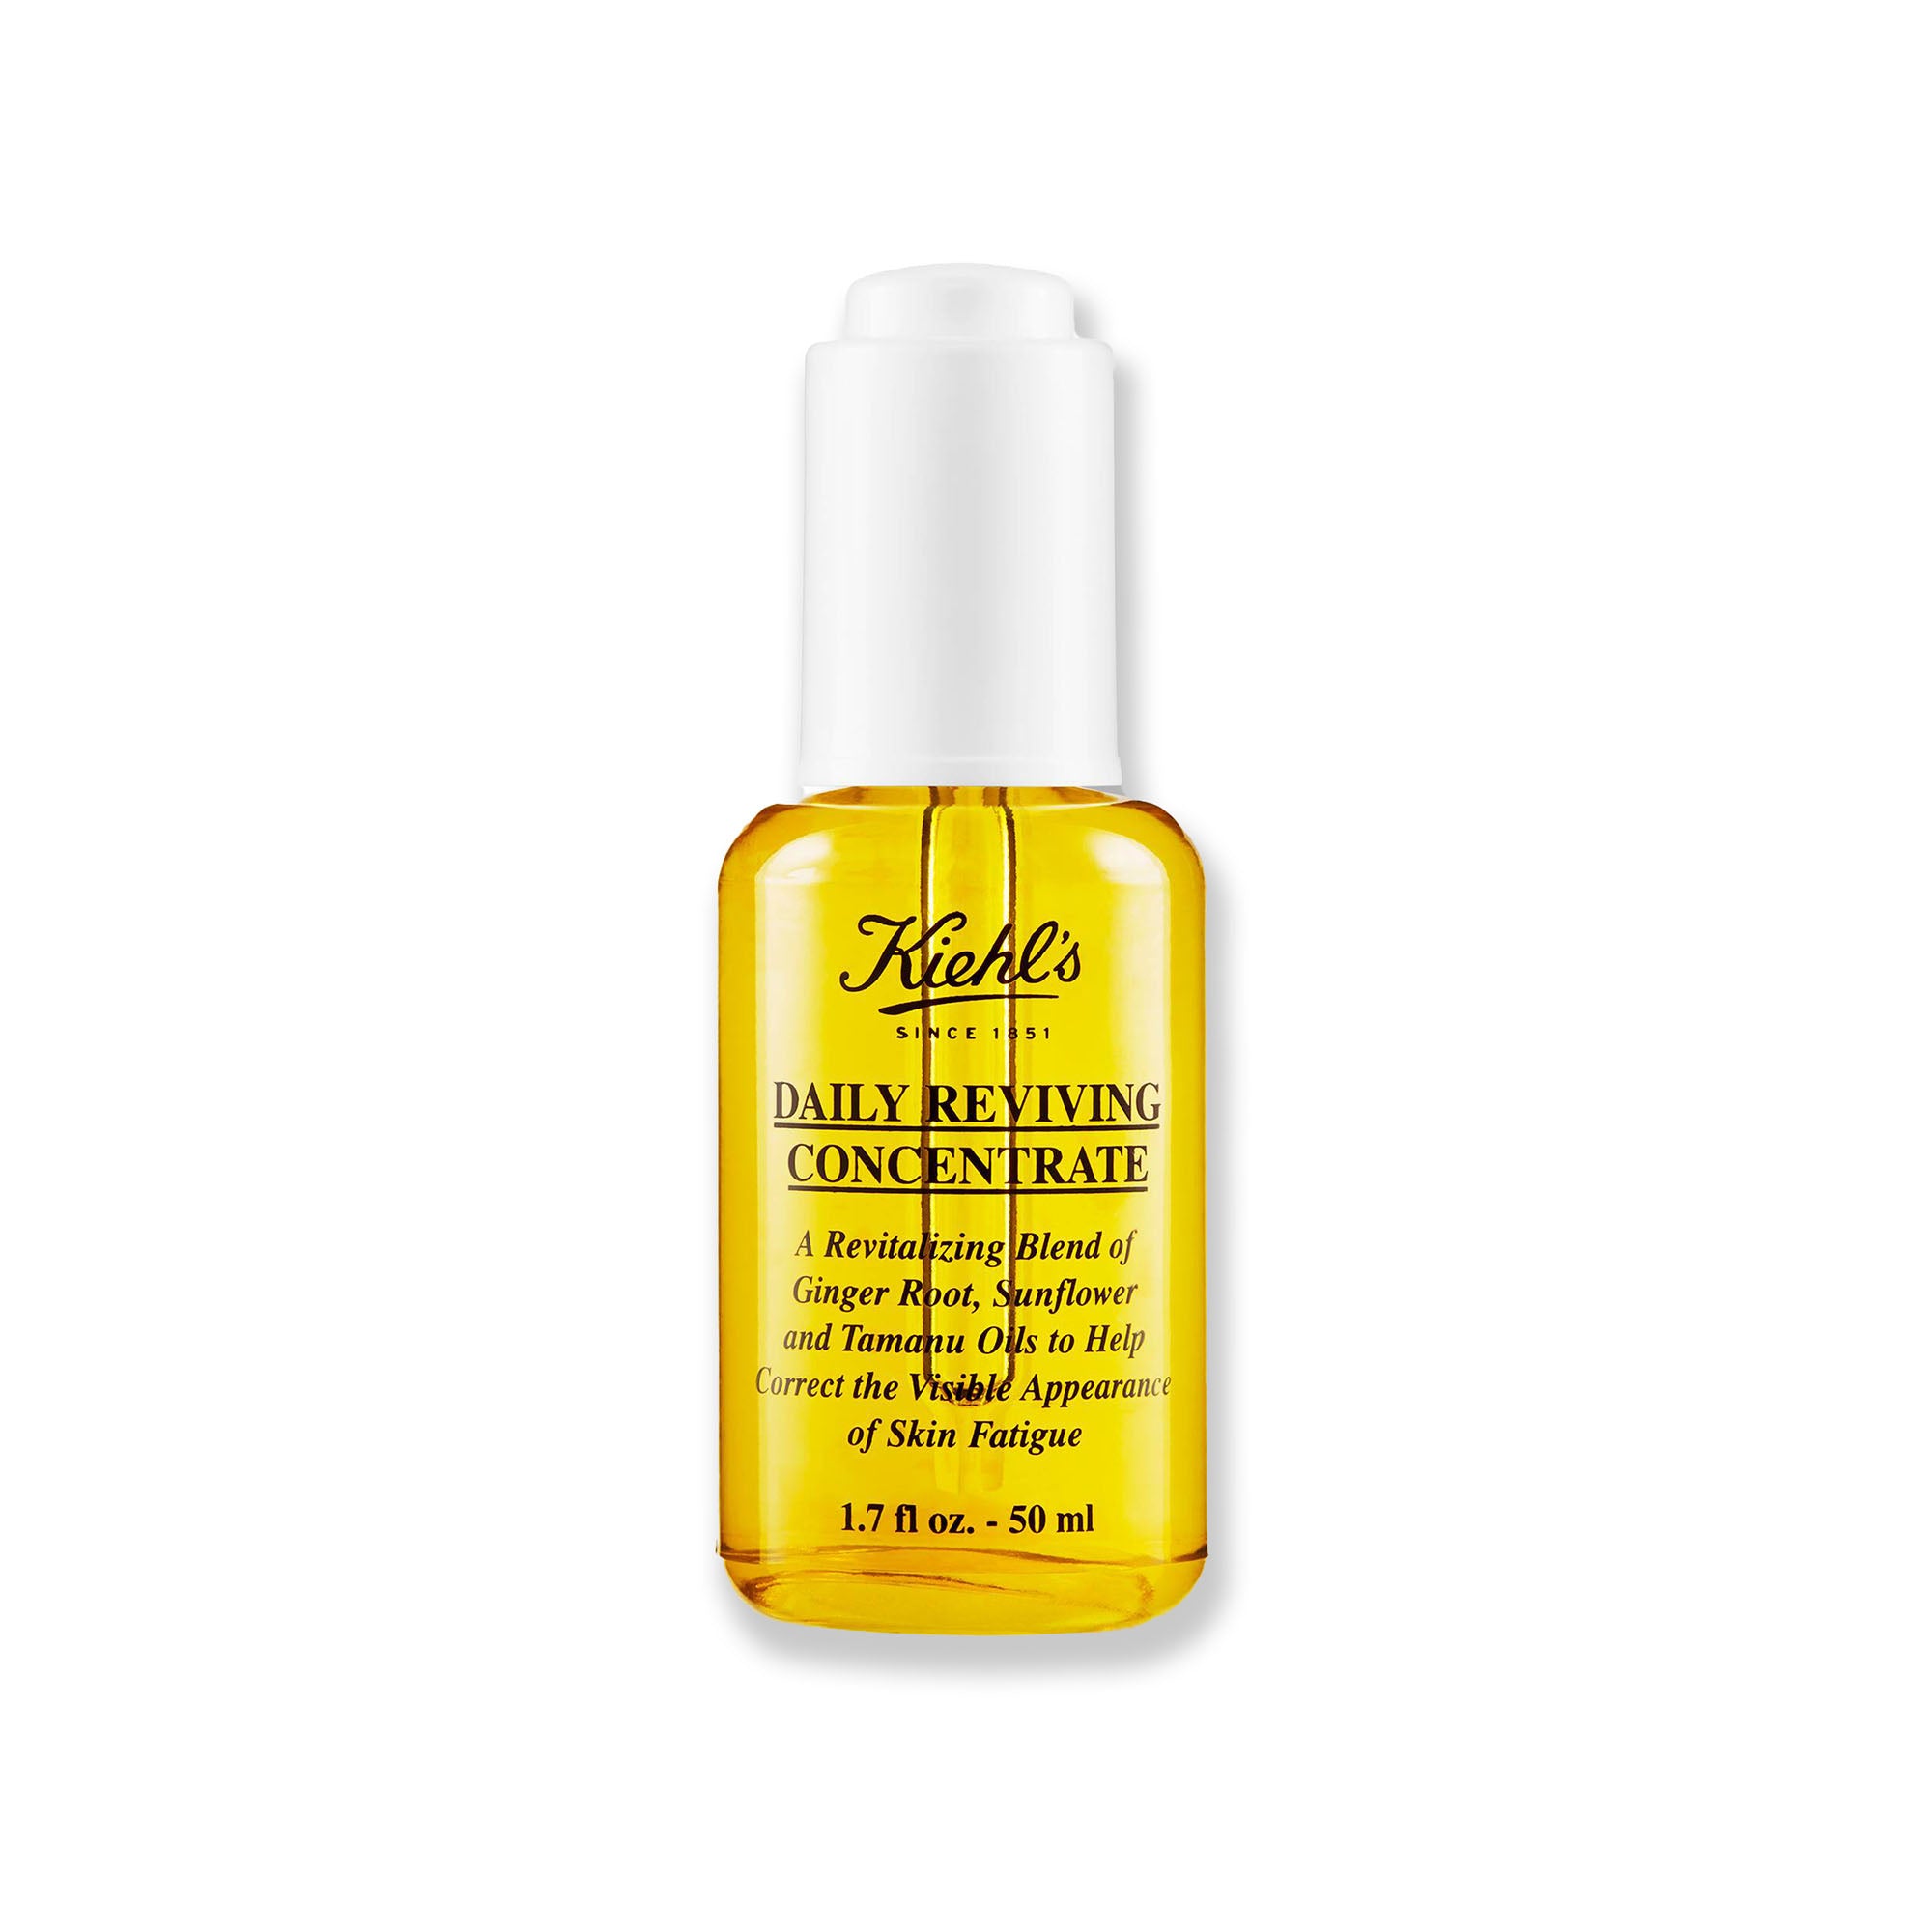 Kiehl's Daily Reviving Concentrate Face Oil / 1.7OZ